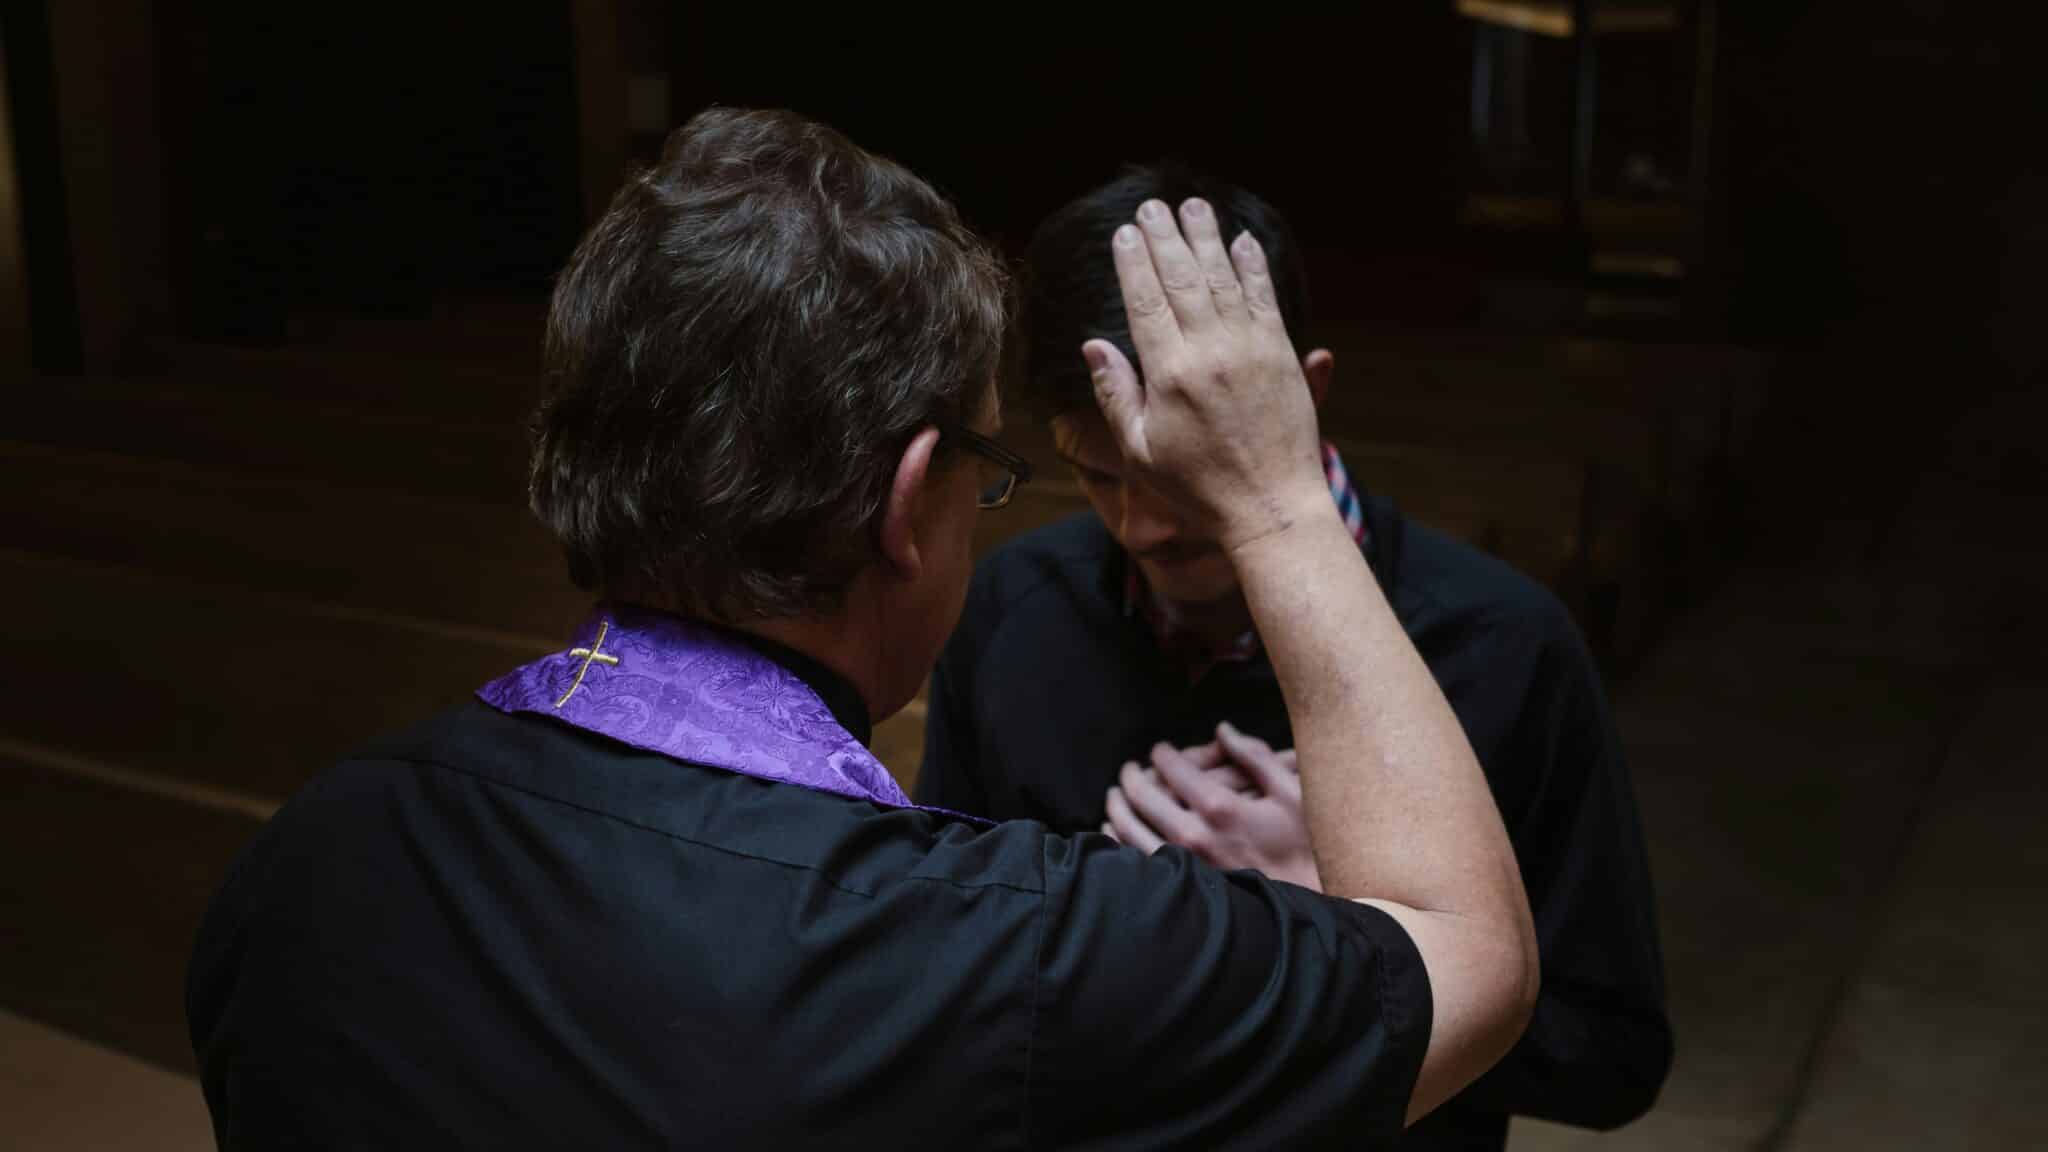 Priest offers a blessing | Photo by Josh Applegate on Unsplash